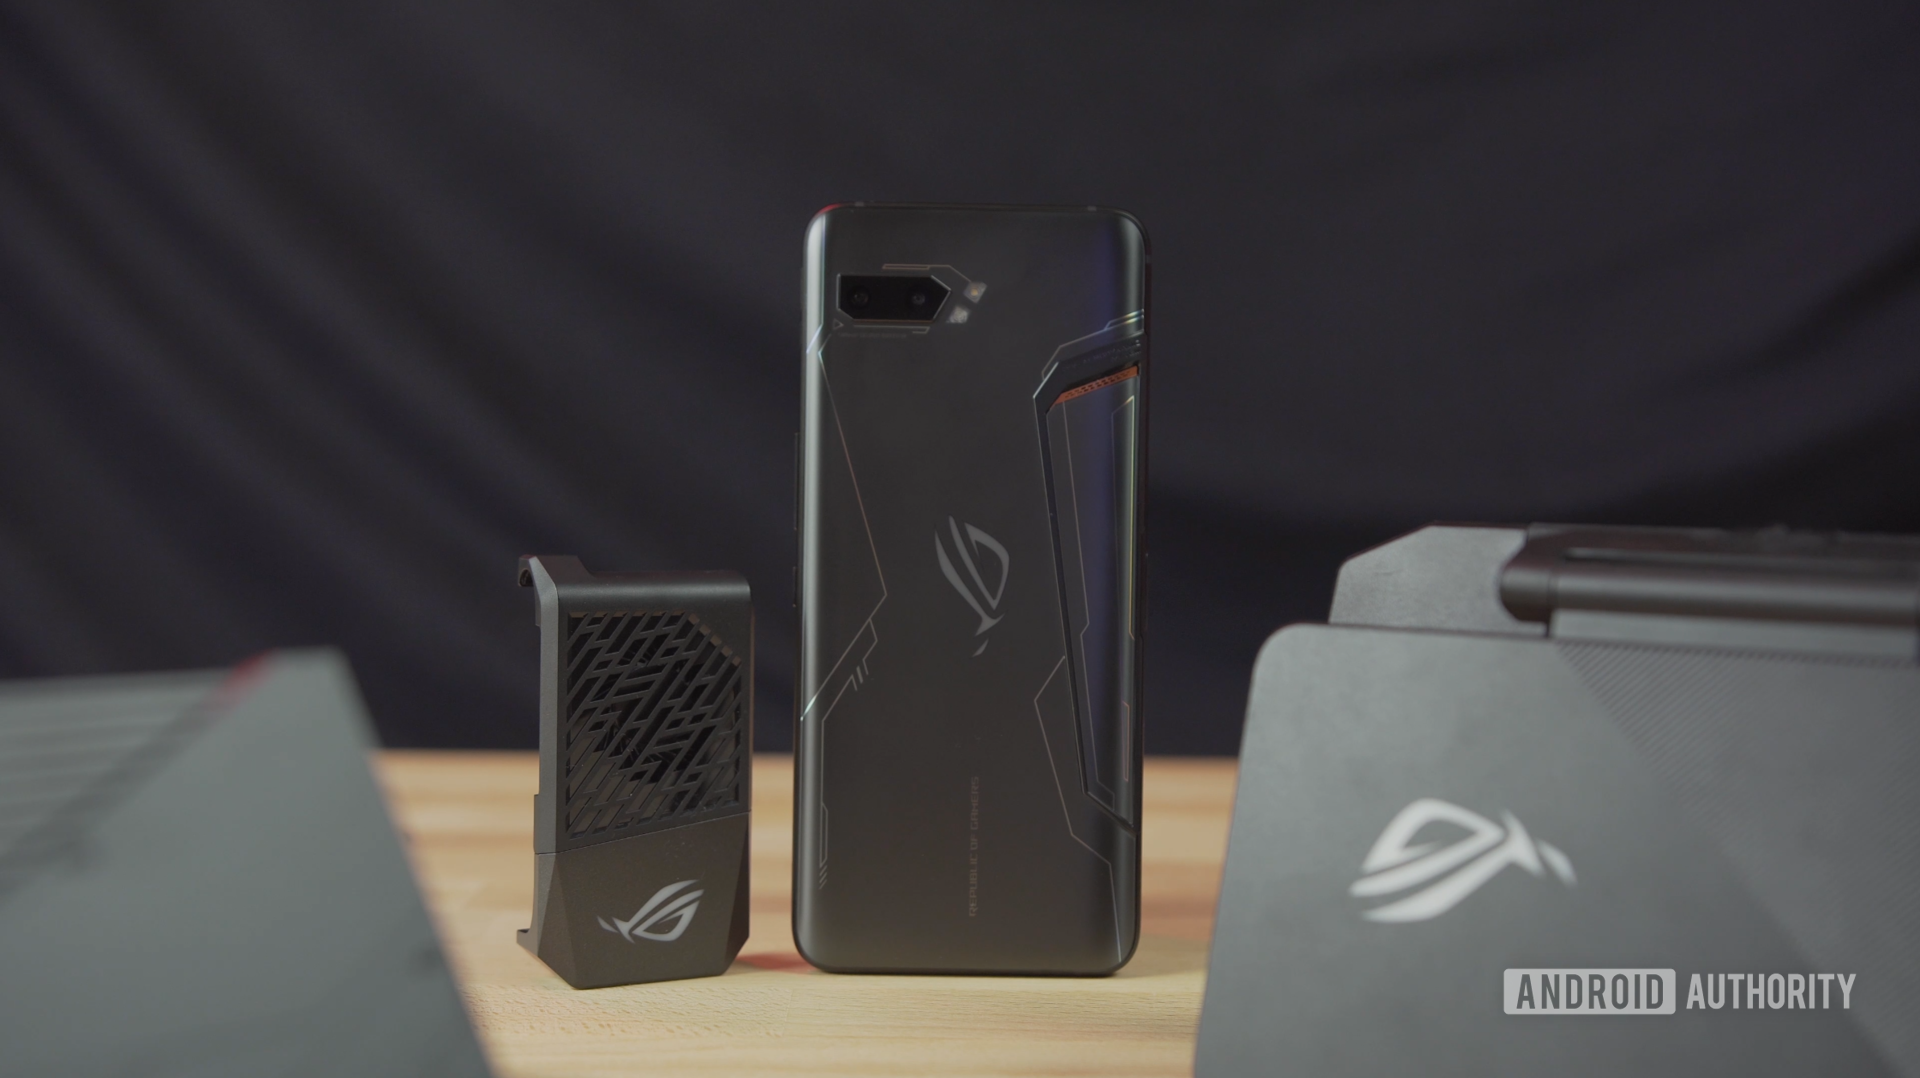 ROG Phone 2 with fan